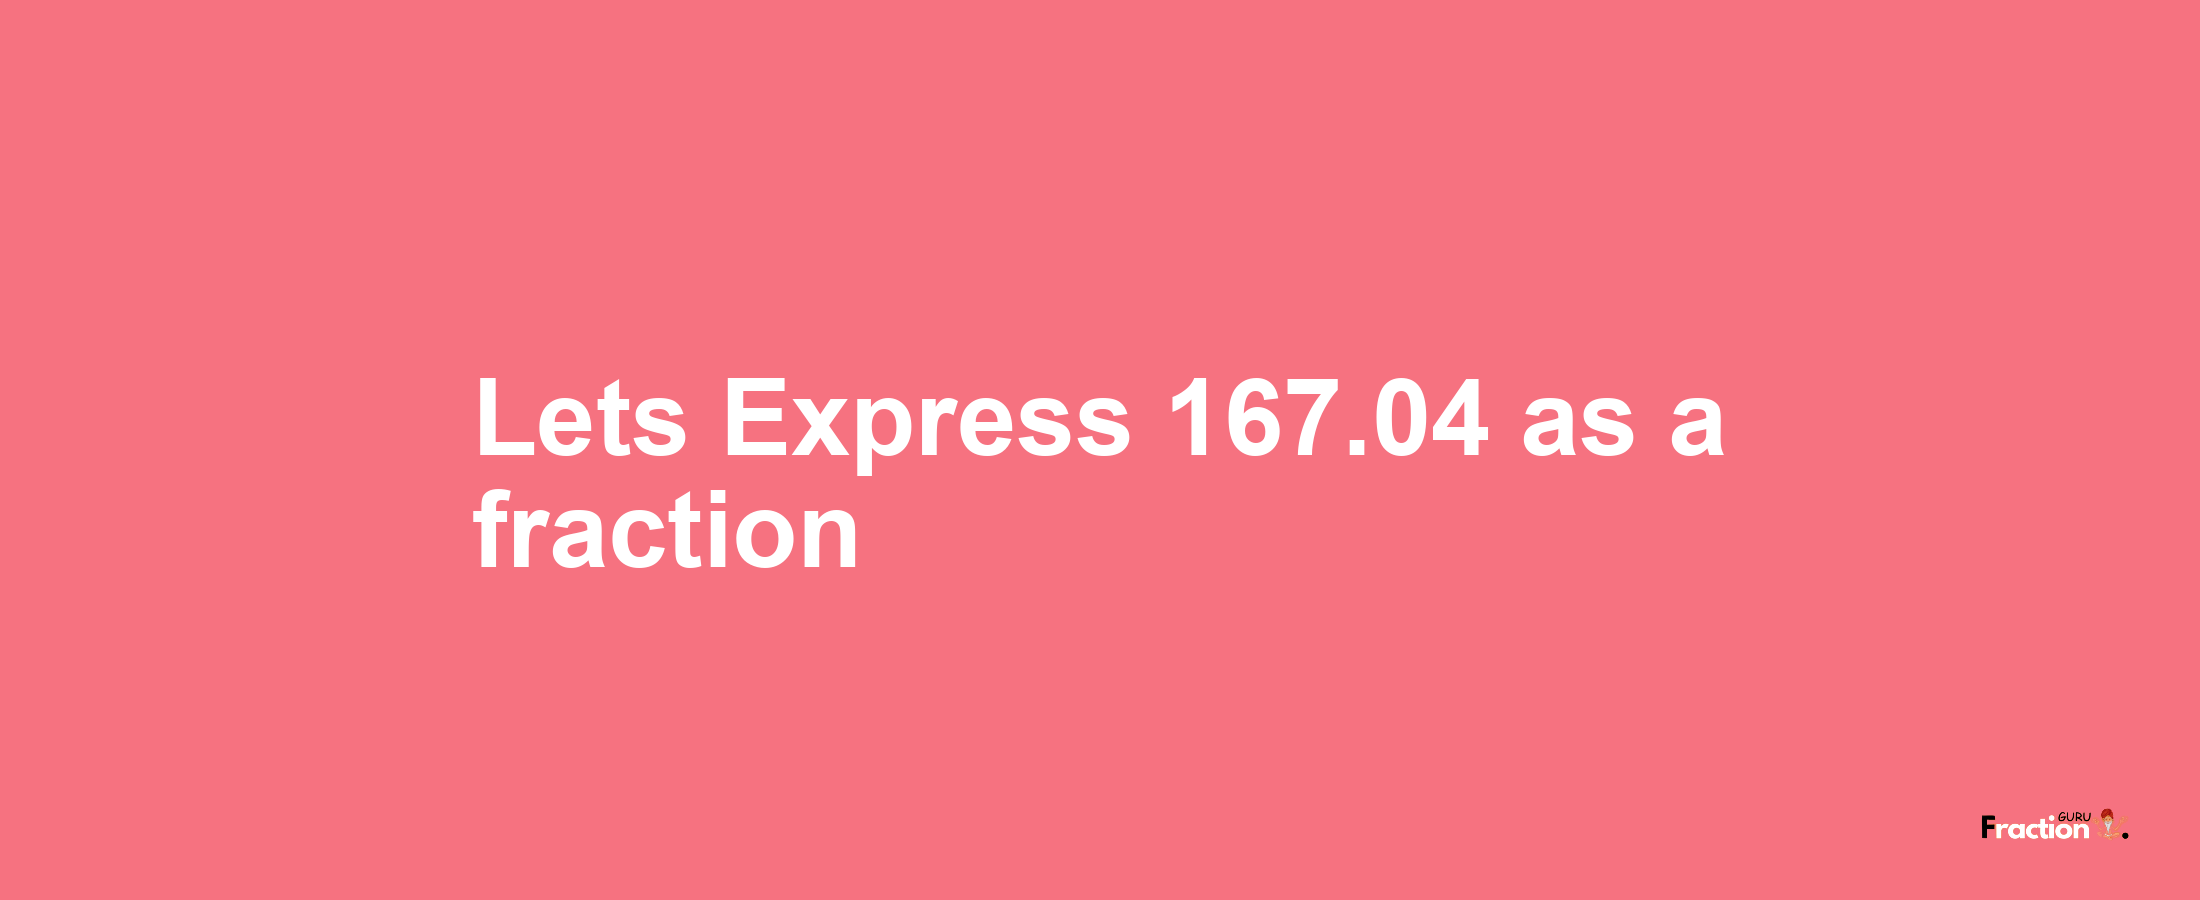 Lets Express 167.04 as afraction